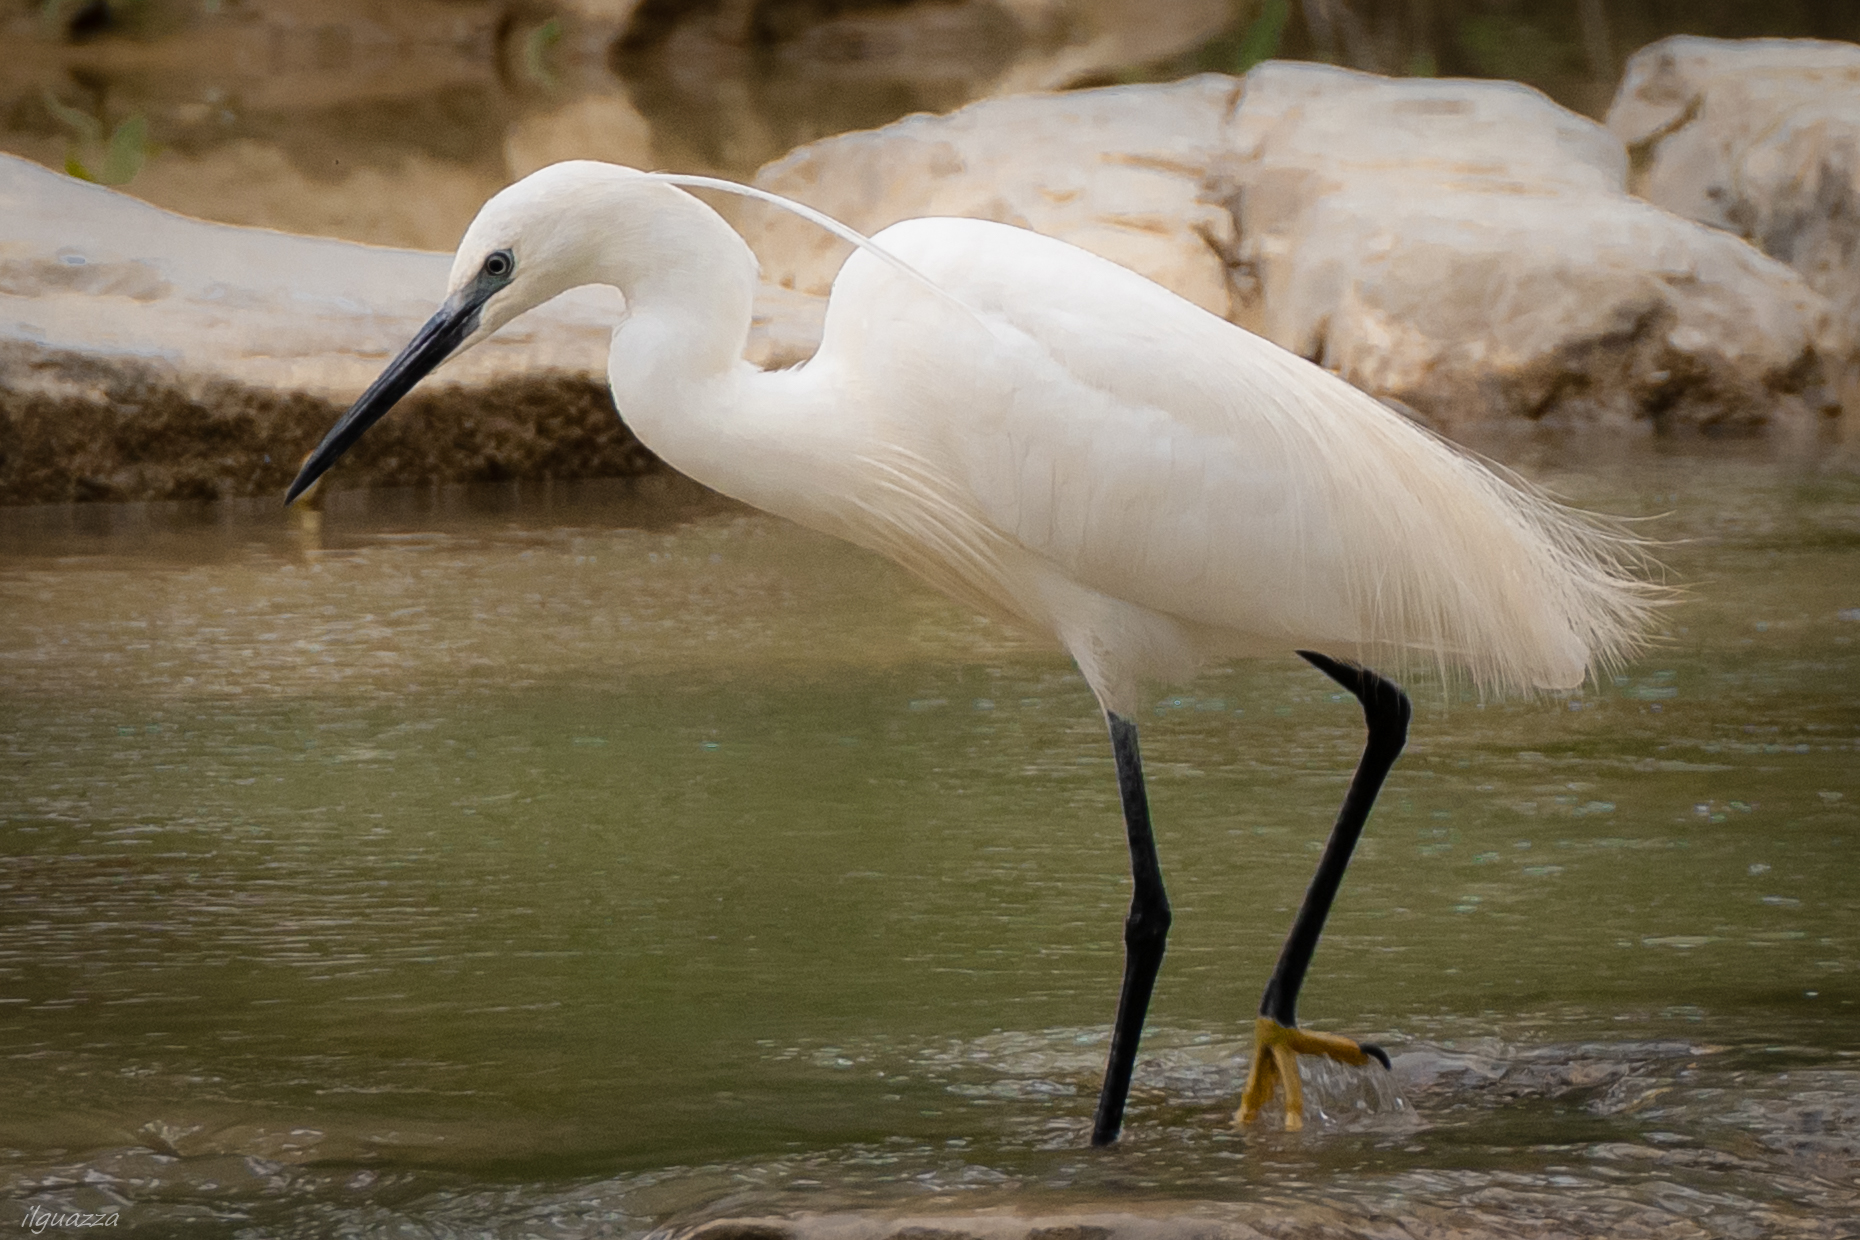 Egrets in weighs...